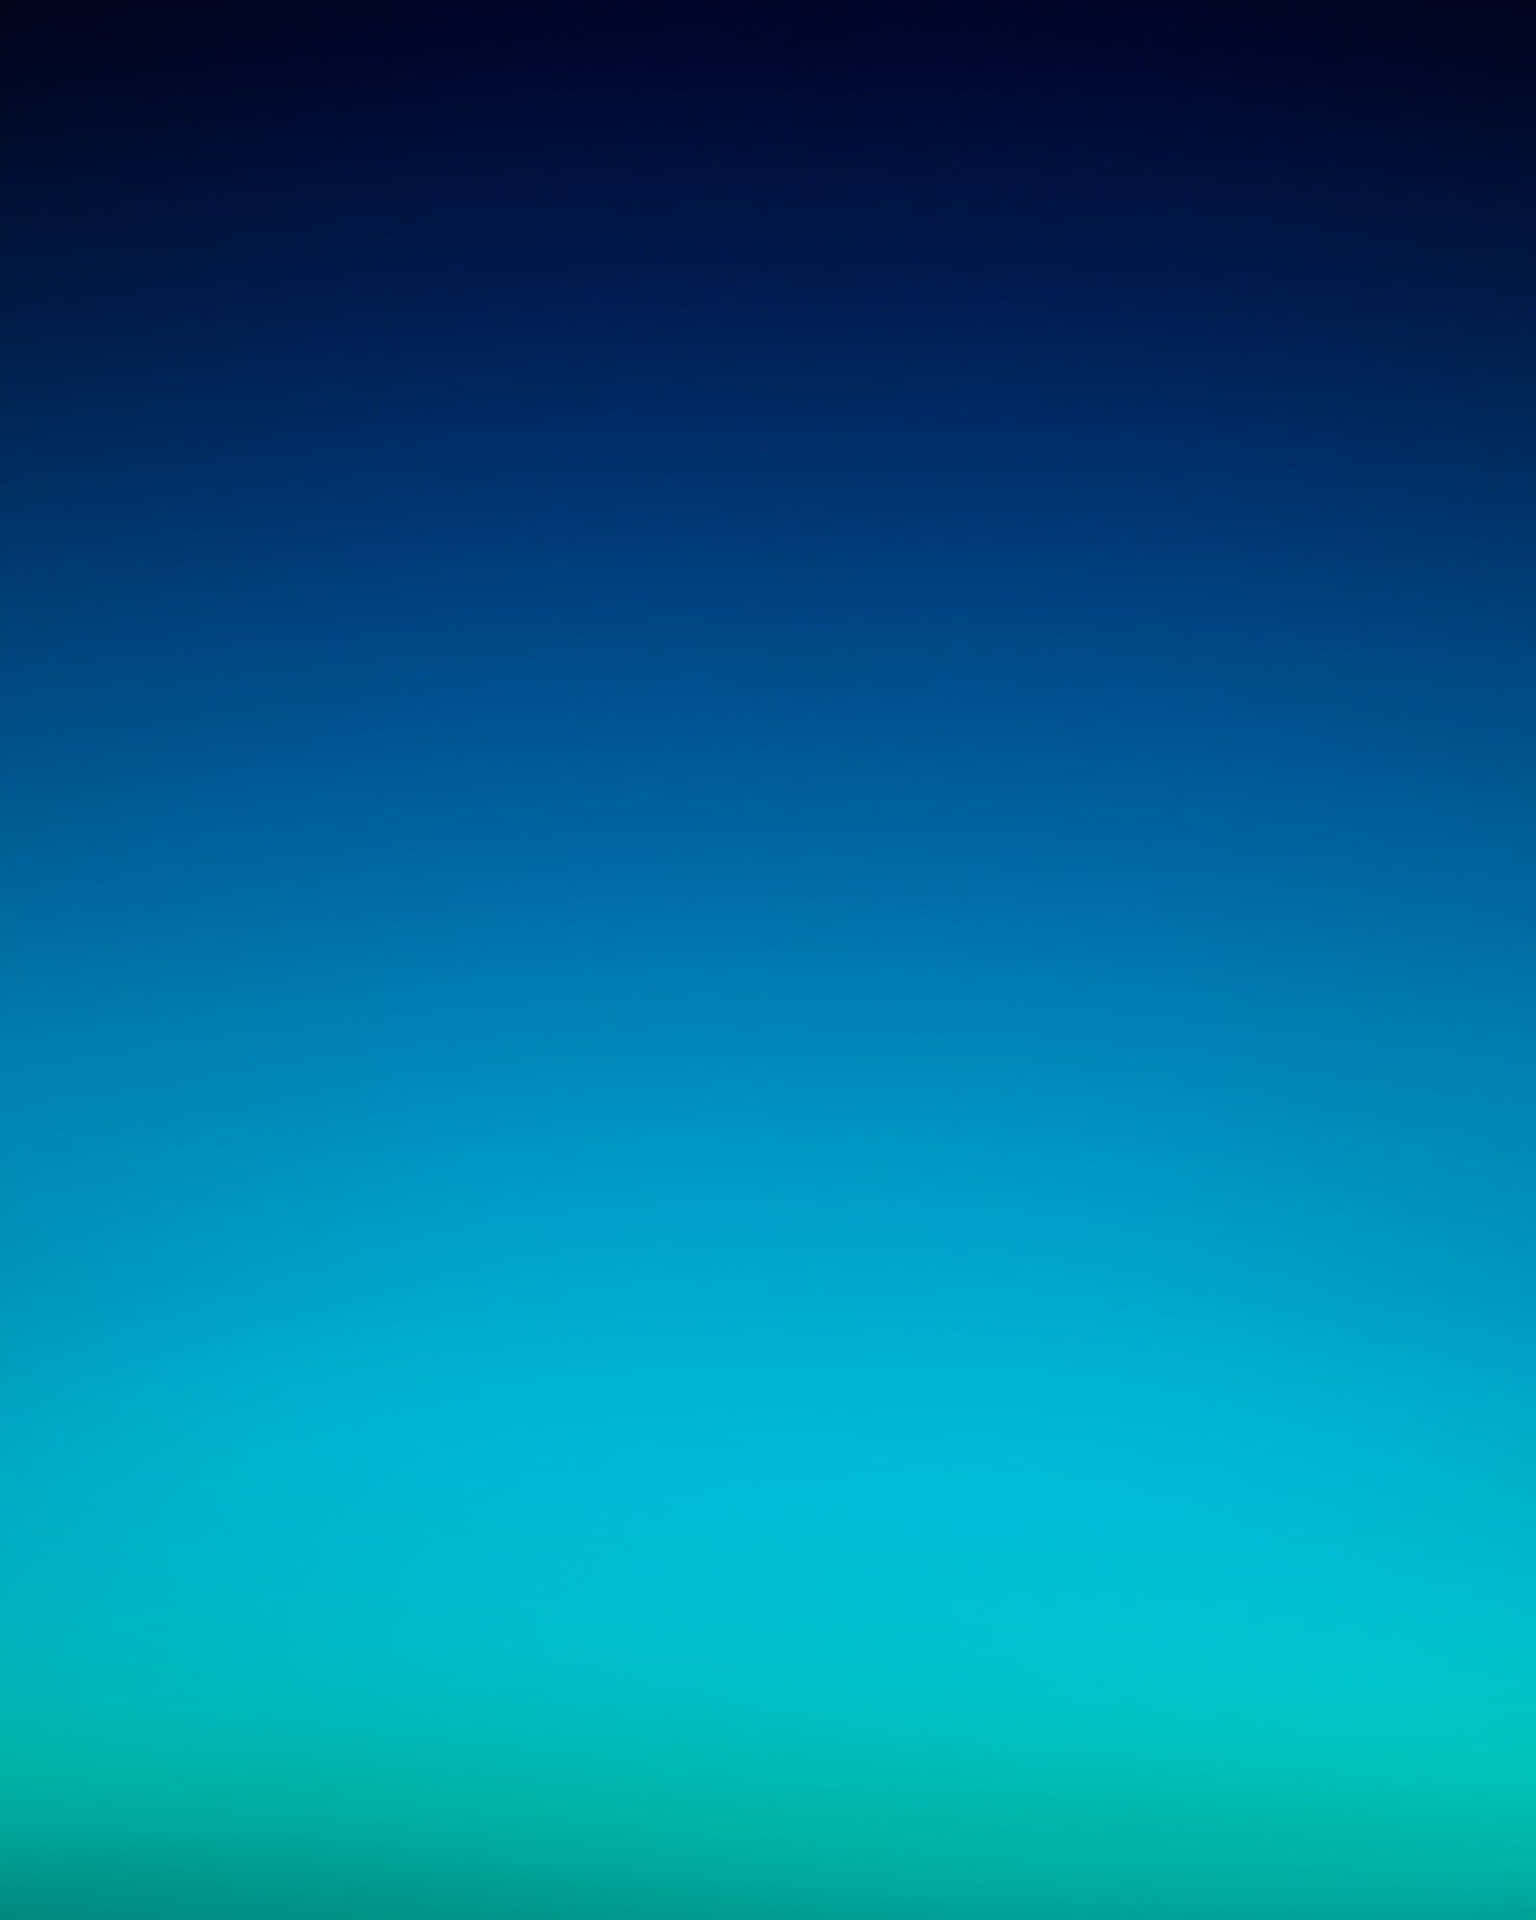 Download Blue Ombre Background Black To Light Blue Texture | Wallpapers.Com